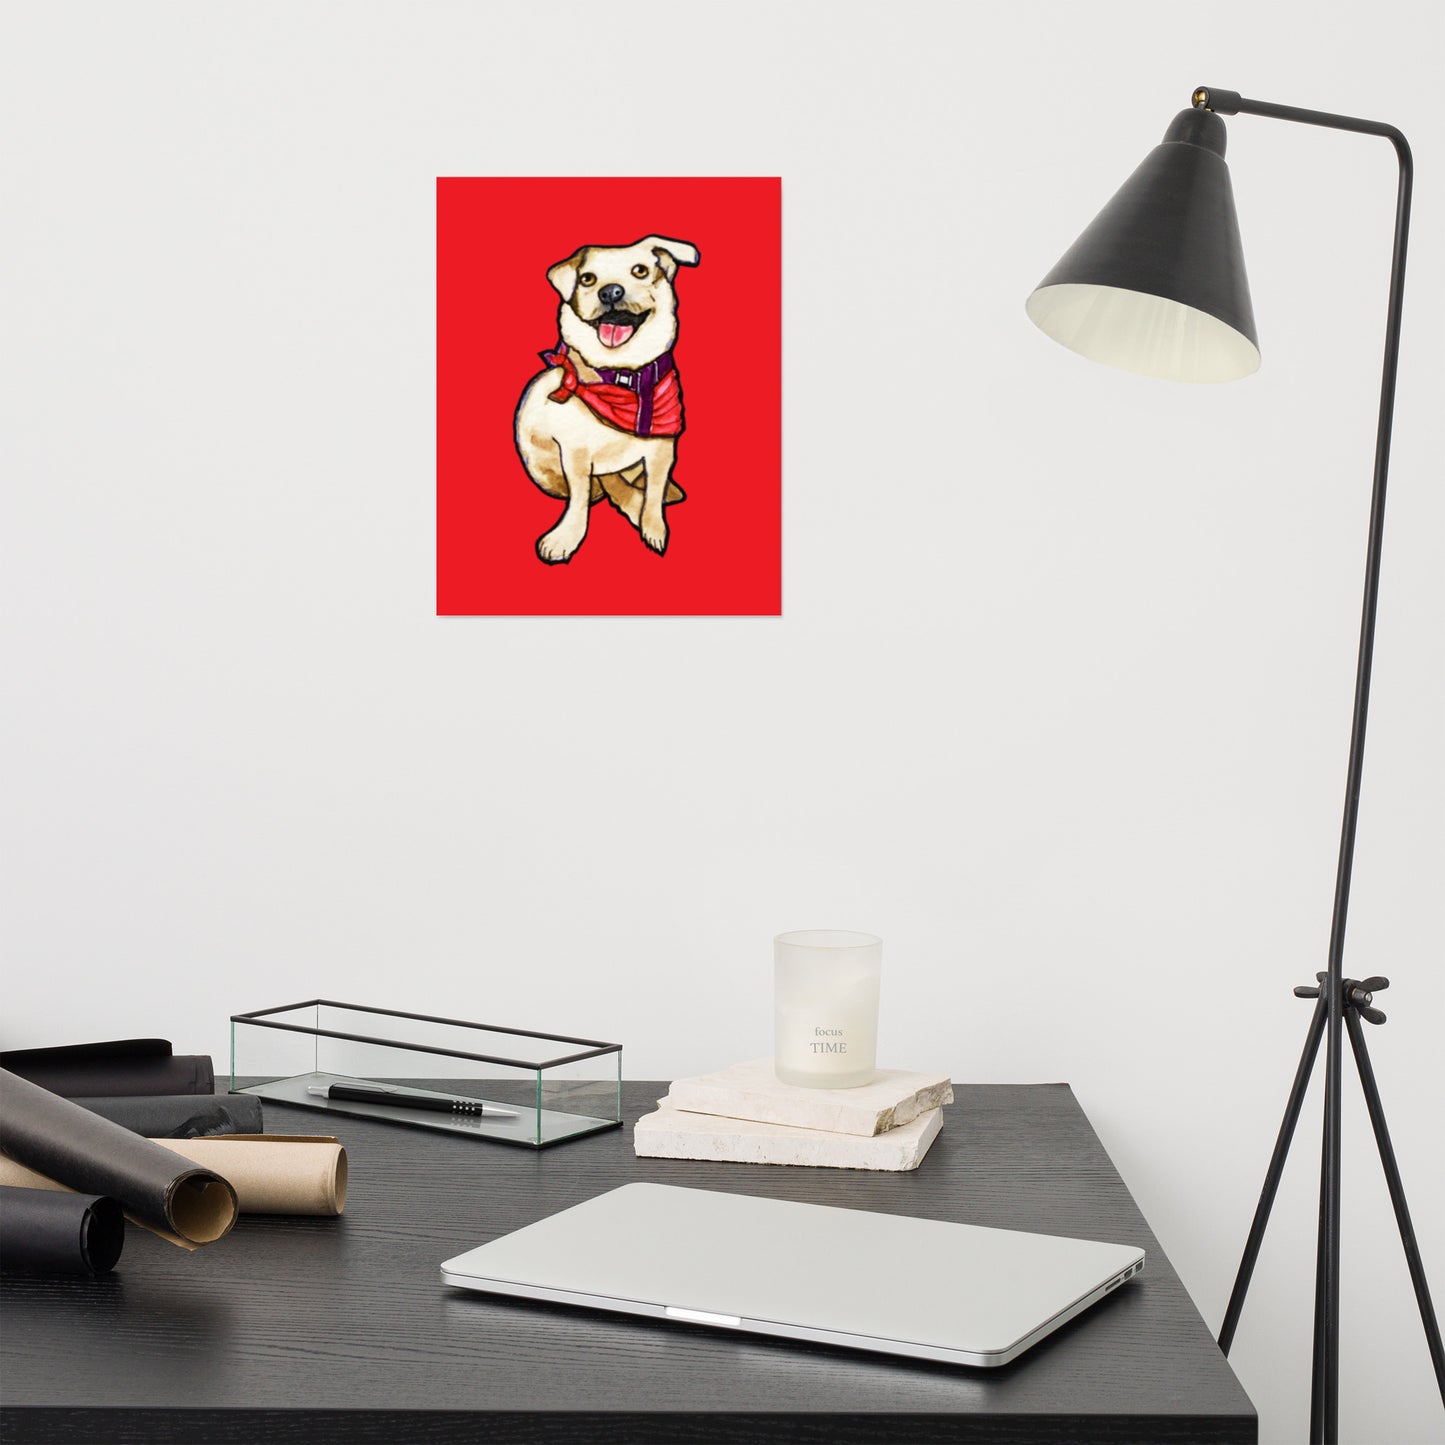 Red Scarf Dog Poster